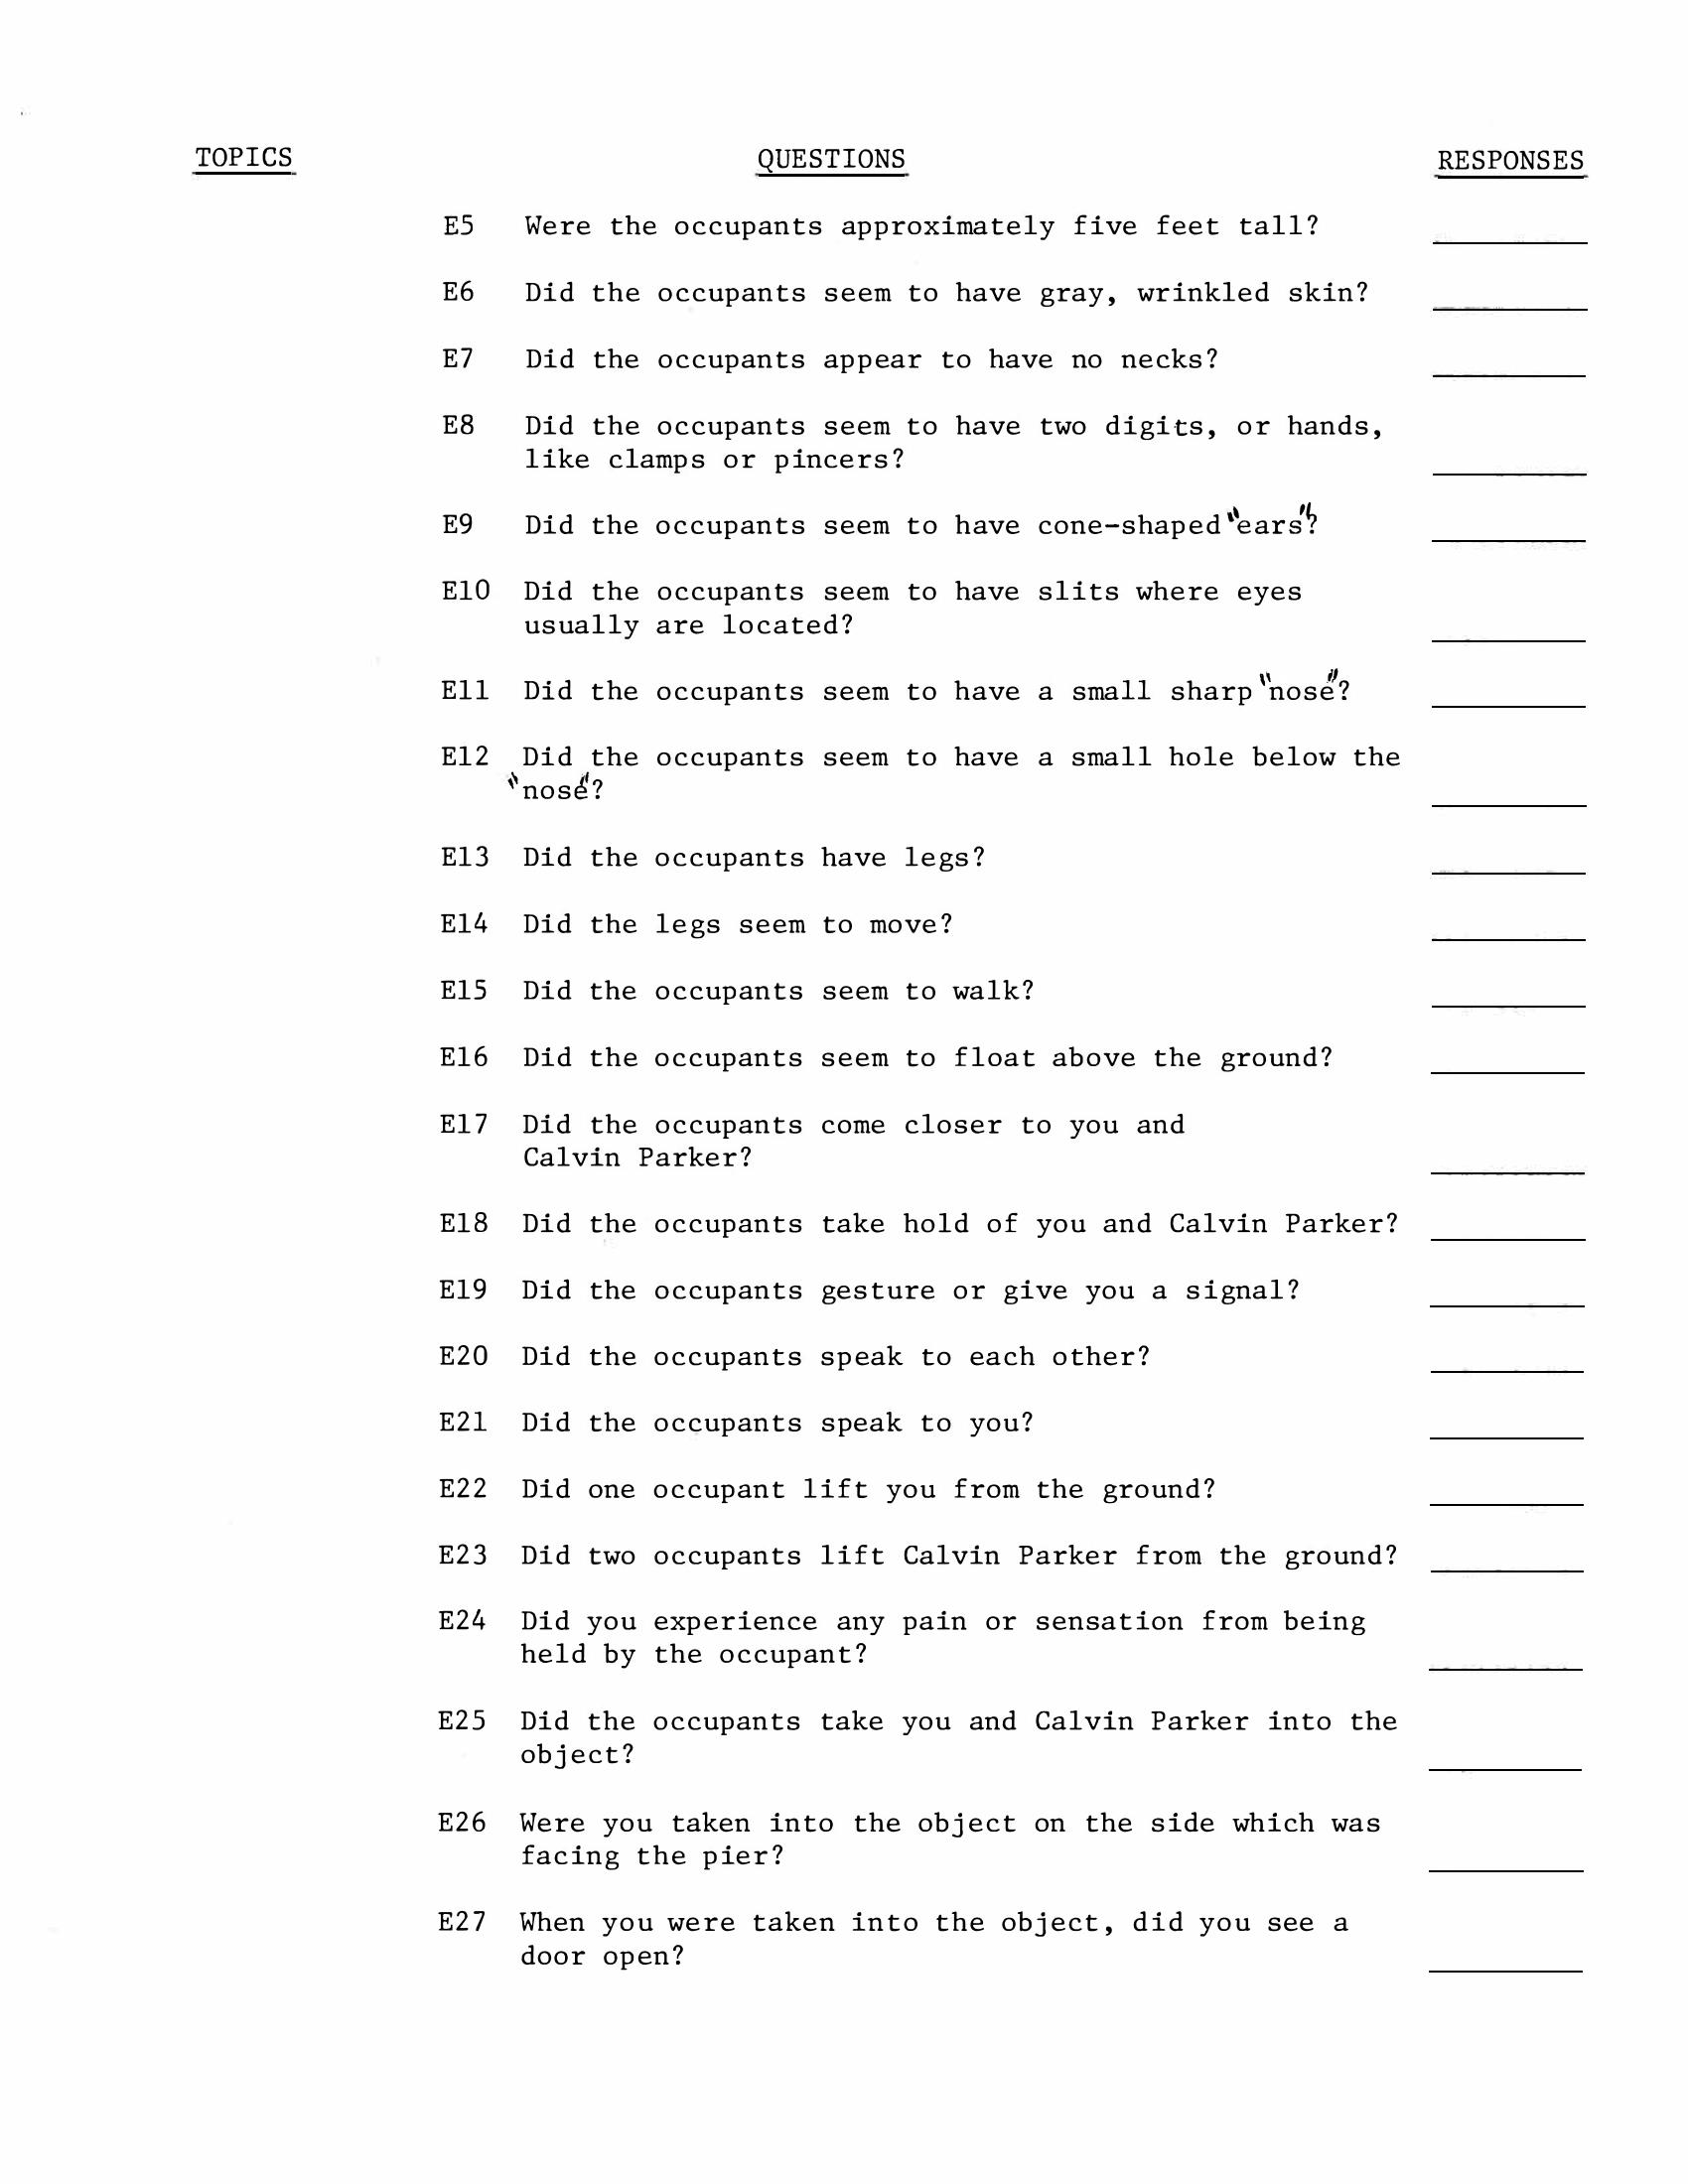 Dr. Sprinkle Questions Page-3